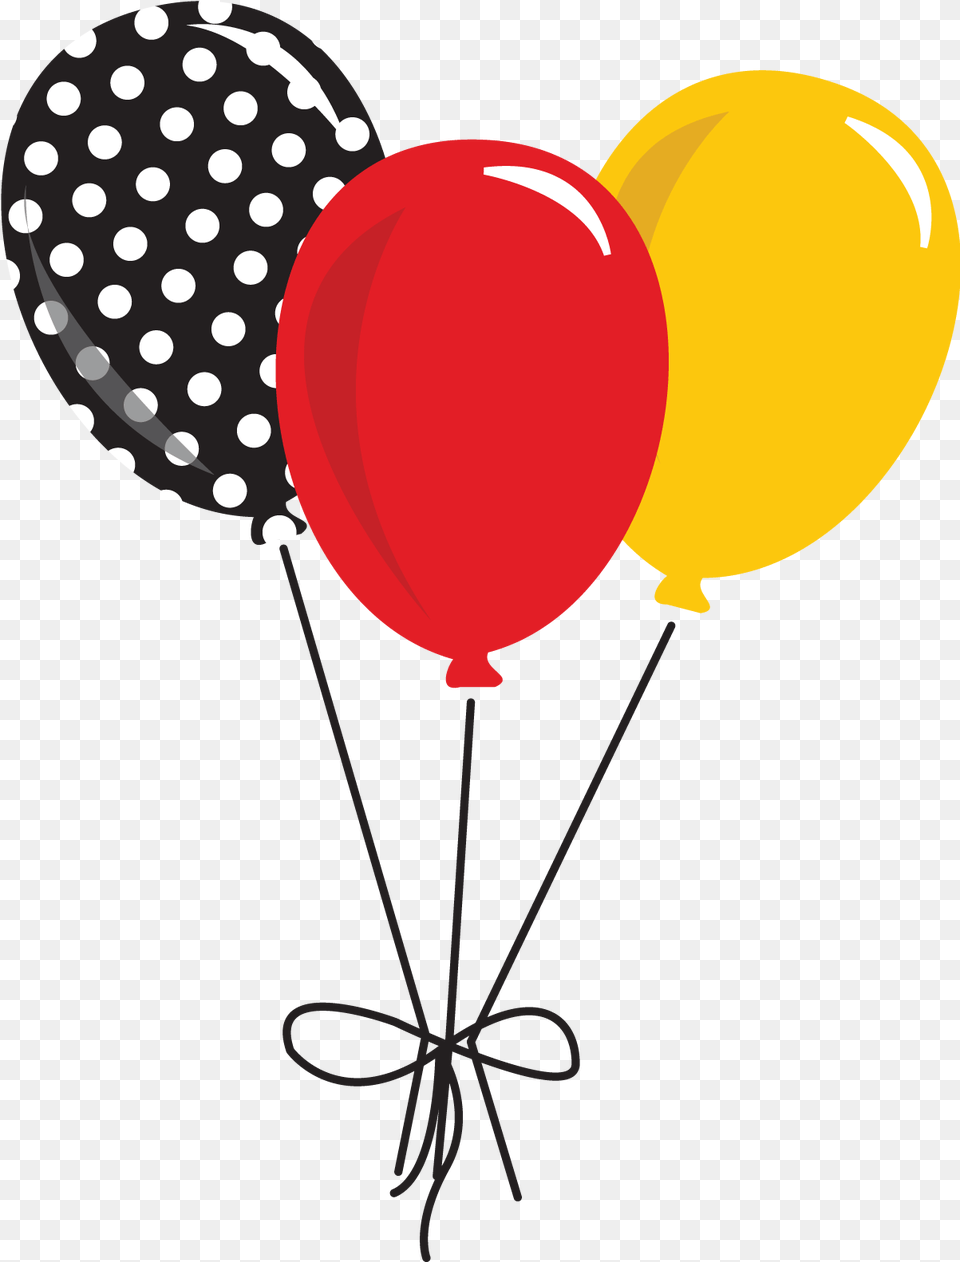 Balloons Mickey Mouse Baloes Minnie Vermelha, Balloon Free Transparent Png